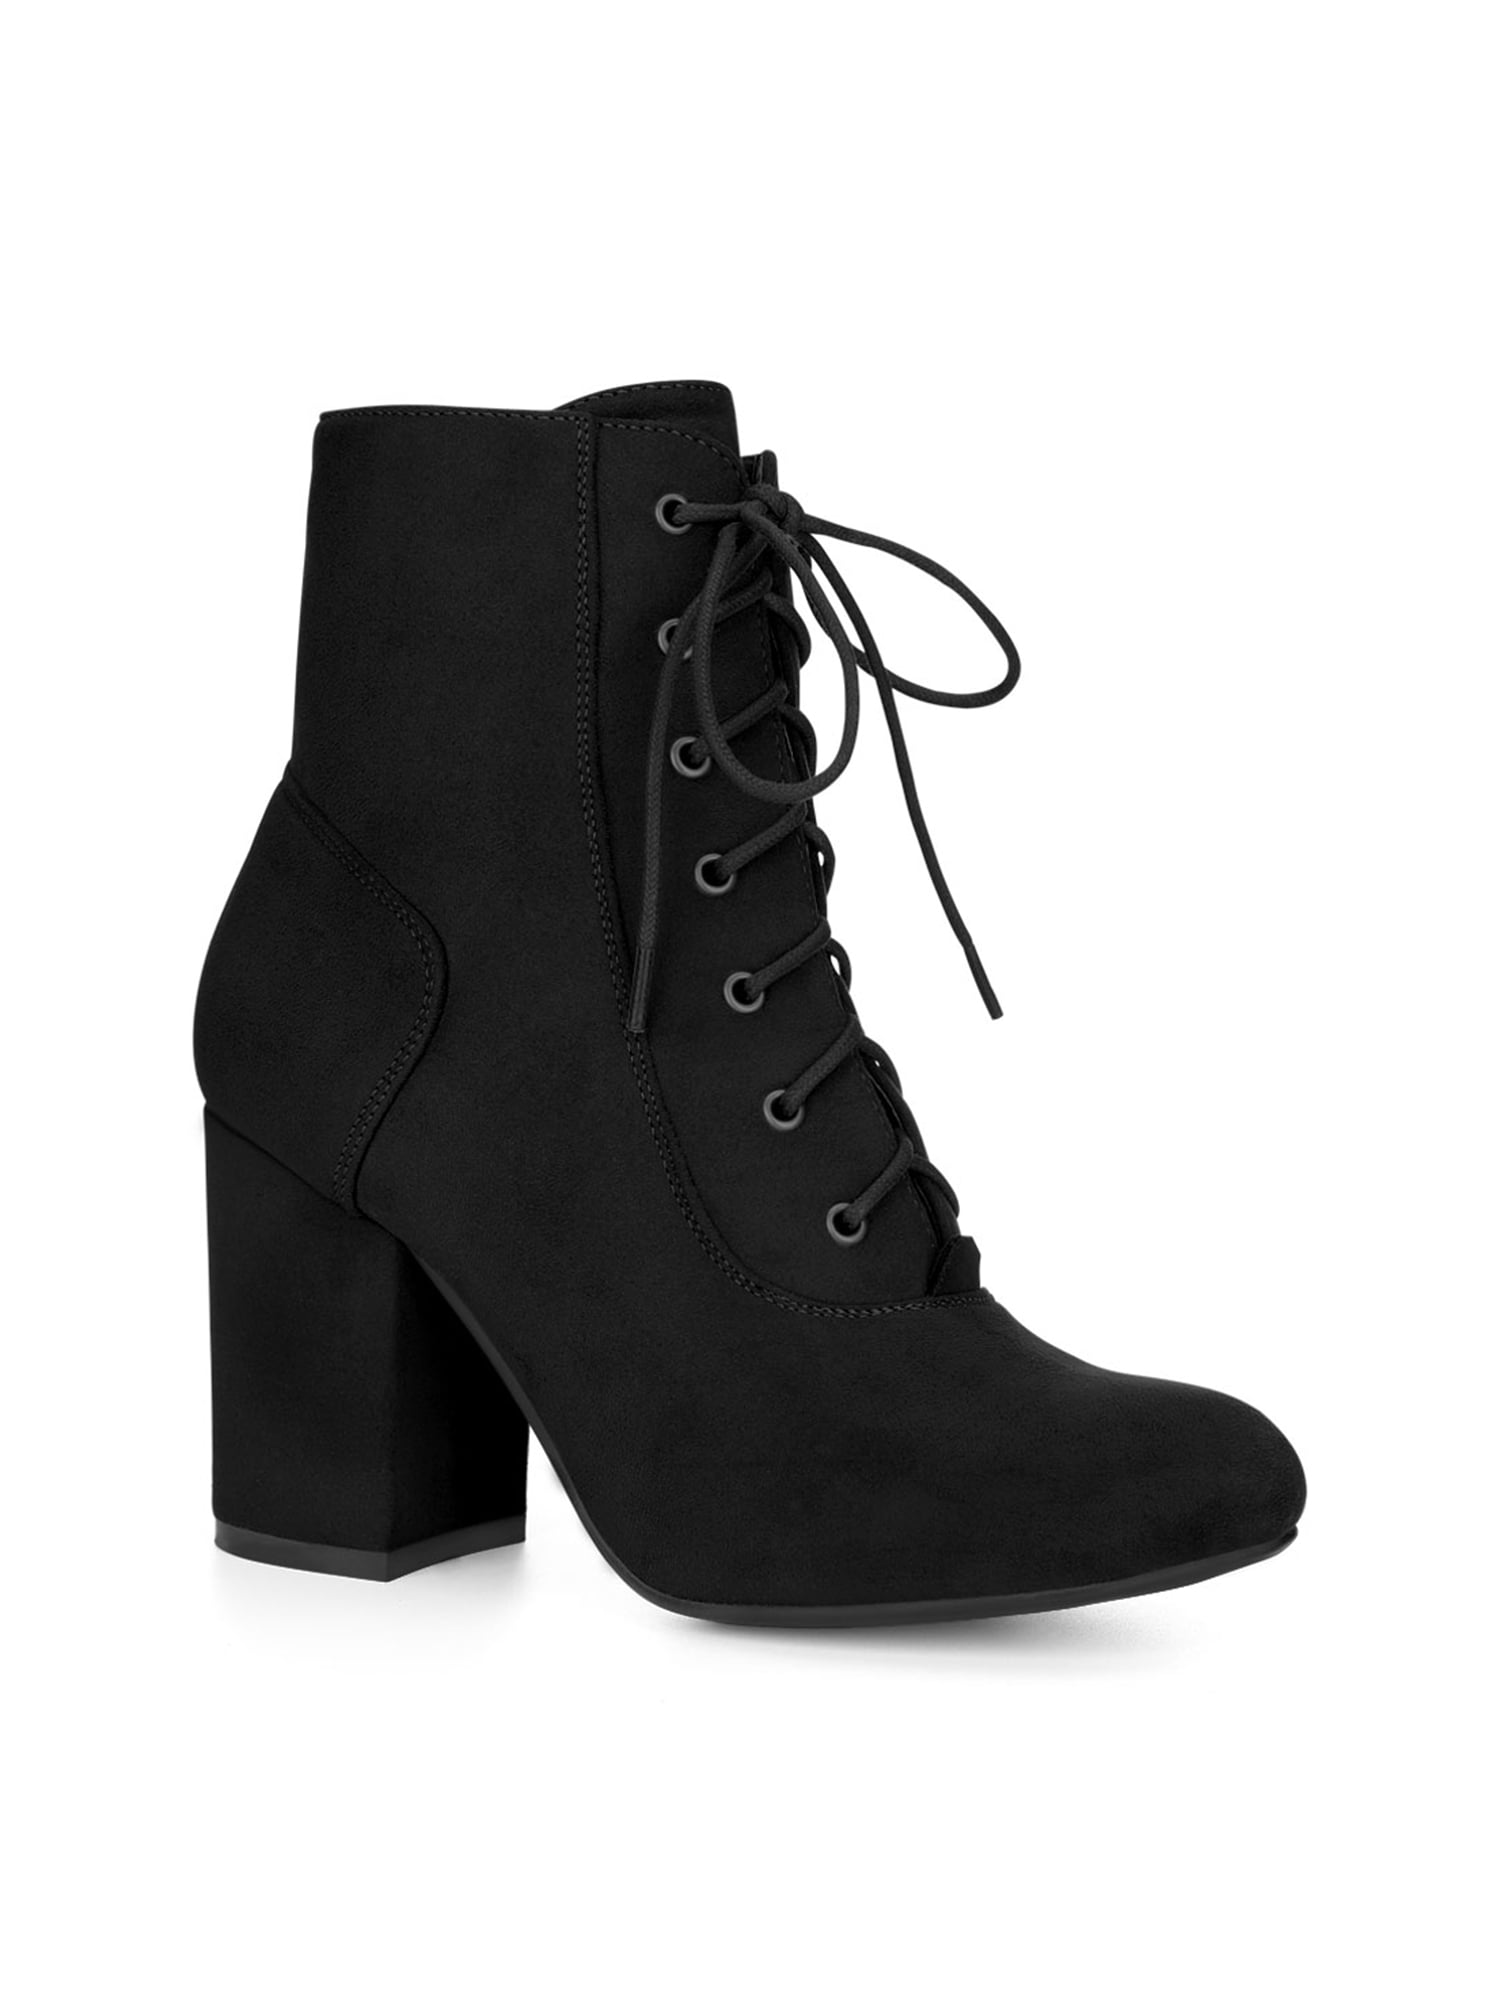 Unique Bargains - Women's Rounded Toe Chunky High Heel Lace Up Booties ...